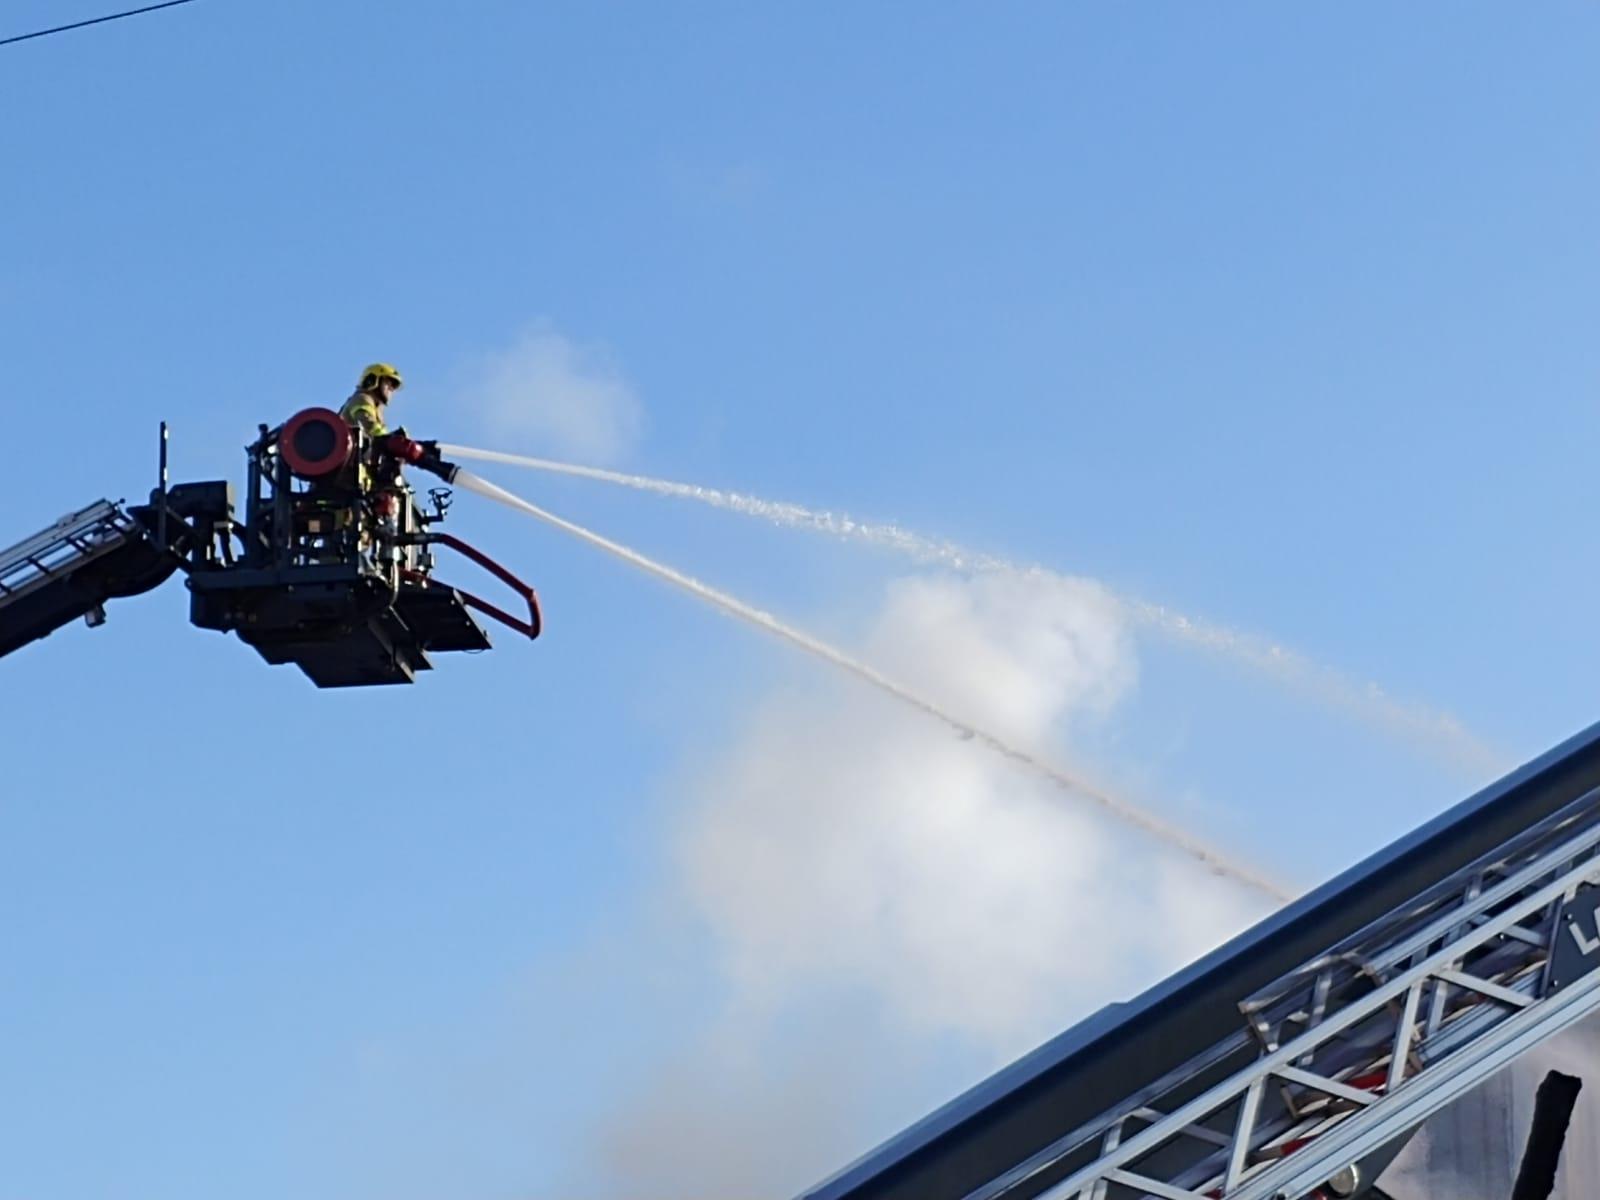 The aerial ladder platform tackles the blaze from above